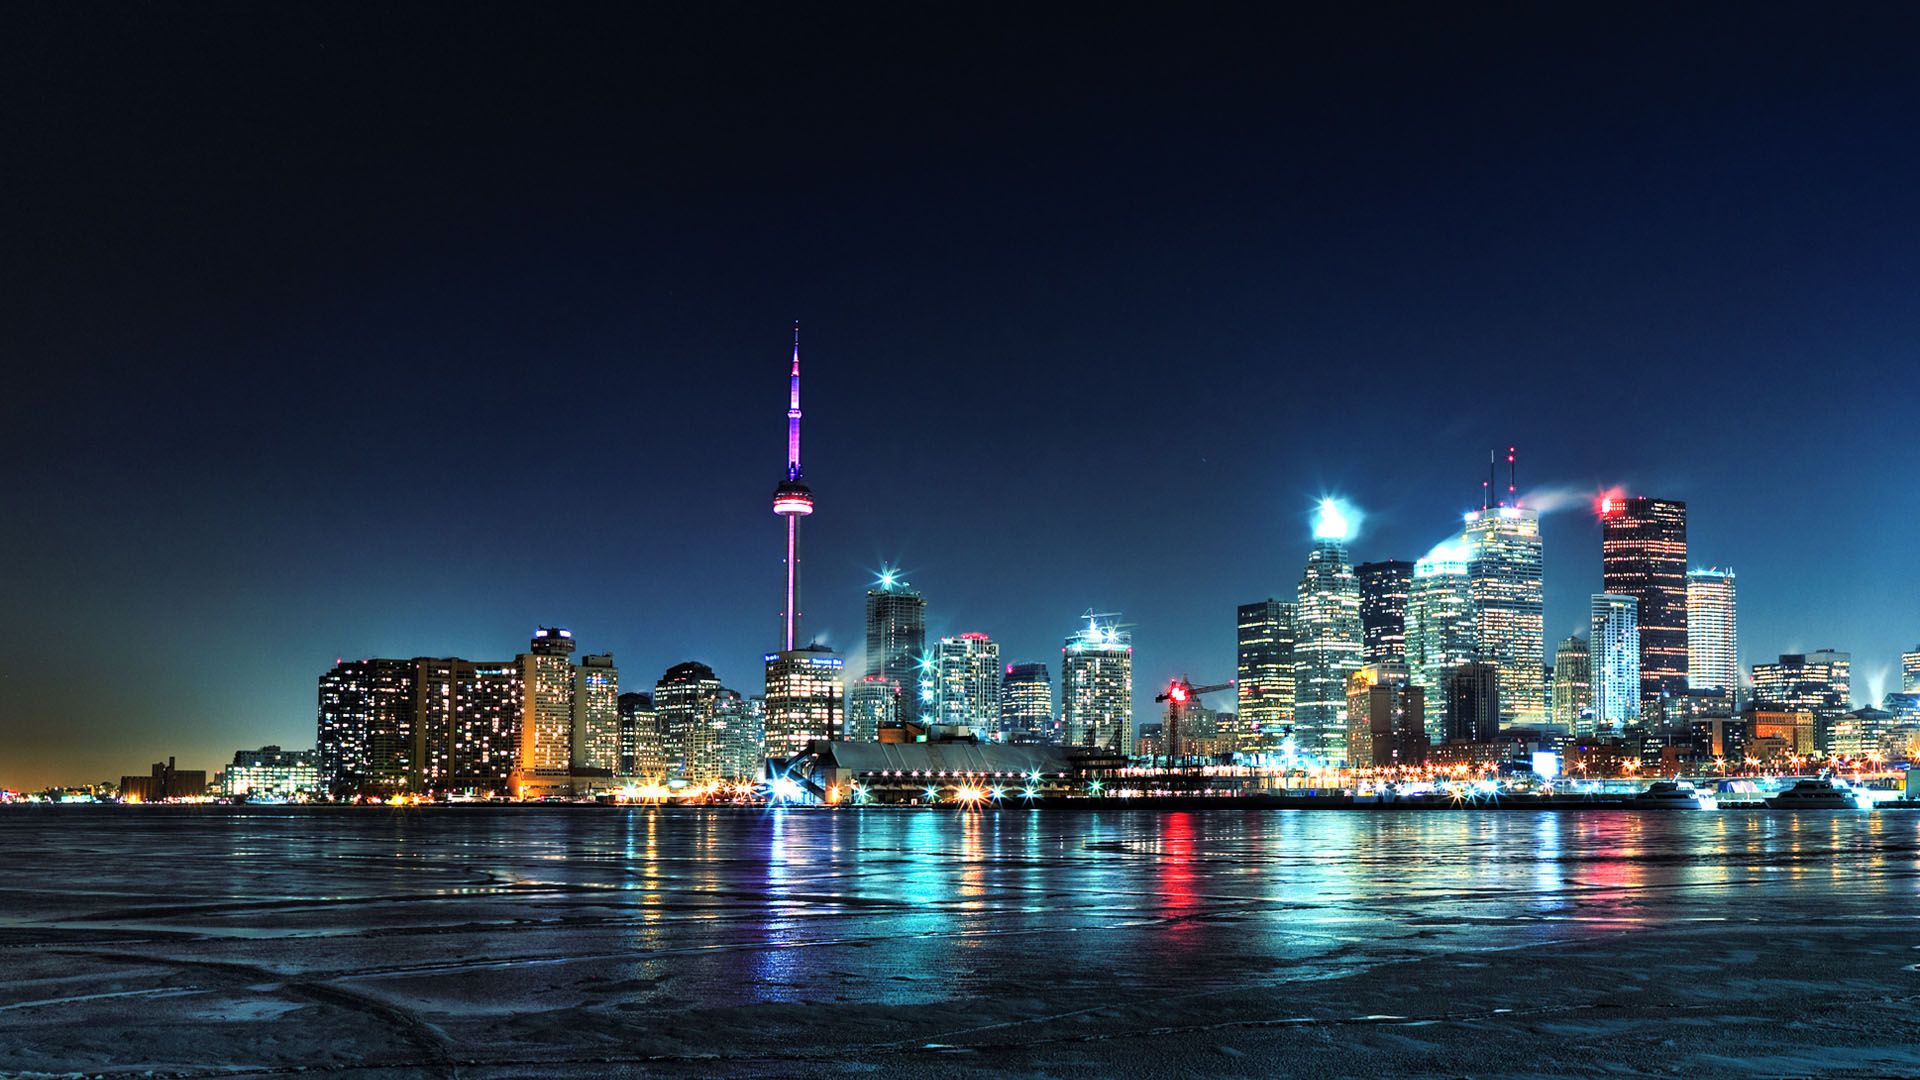 1920x1080 Wallpaper Tags Toronto Night City City Lights Share This Wallpaper In 2022 Canada City Toronto Picture City Lights At Night